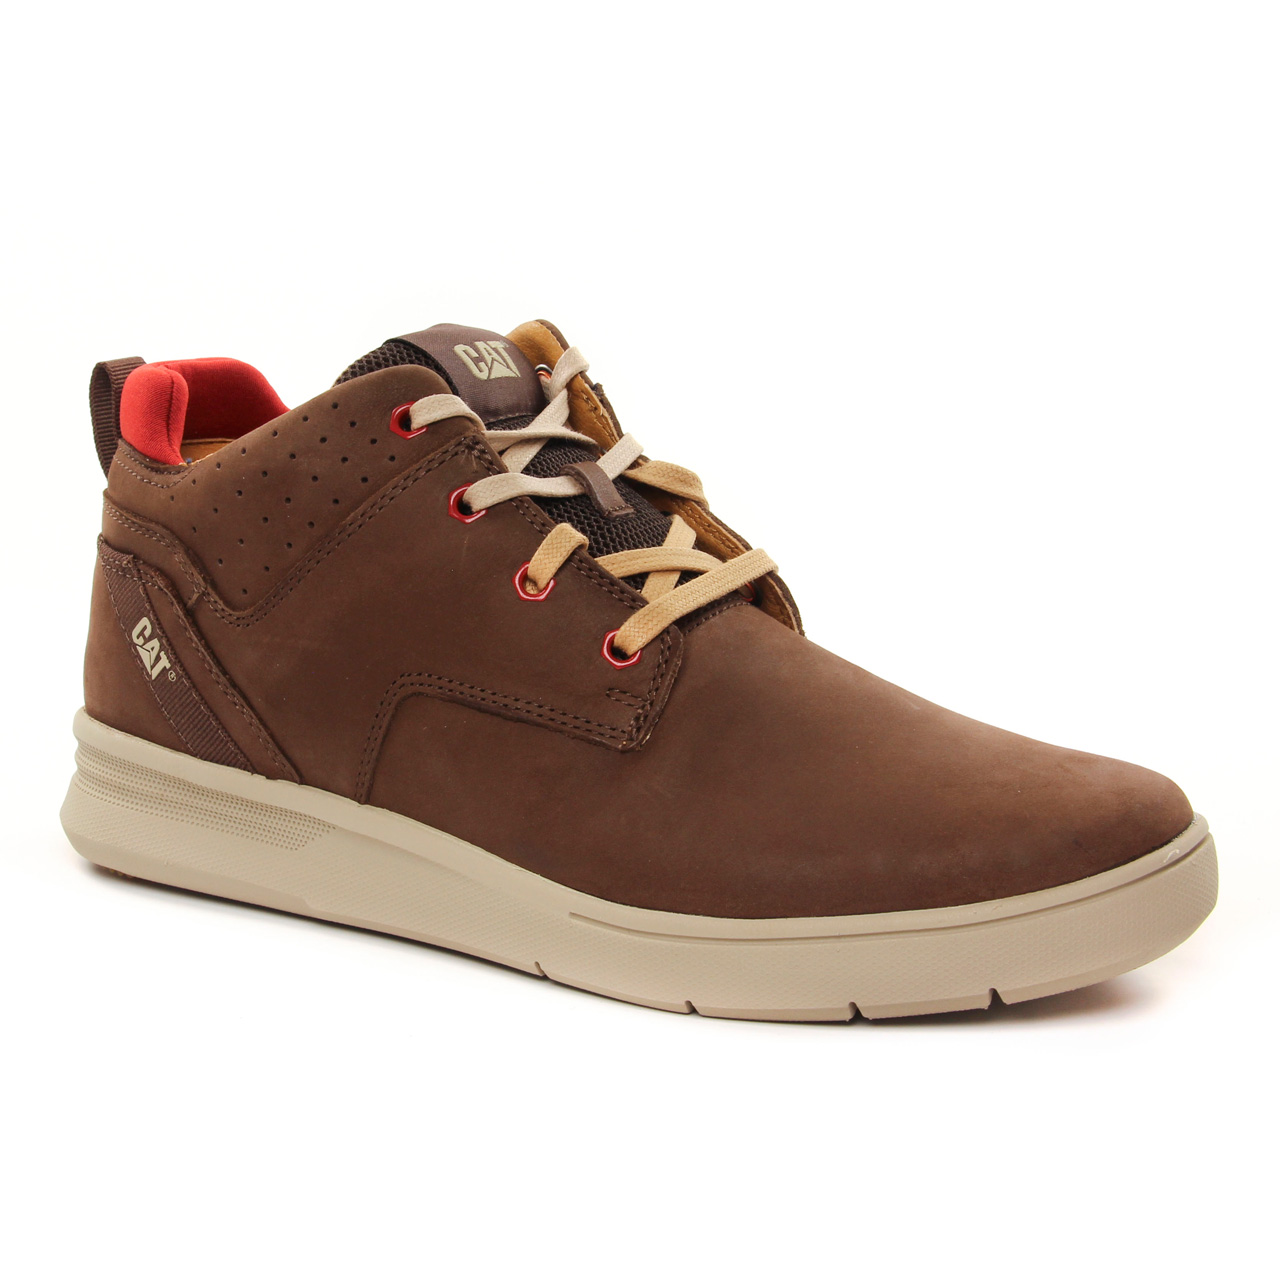 Homme Chaussures Cat Homme Chaussures à lacets Cat Homme Chaussures à lacets CAT 45 marron Chaussures à lacets Cat Homme 